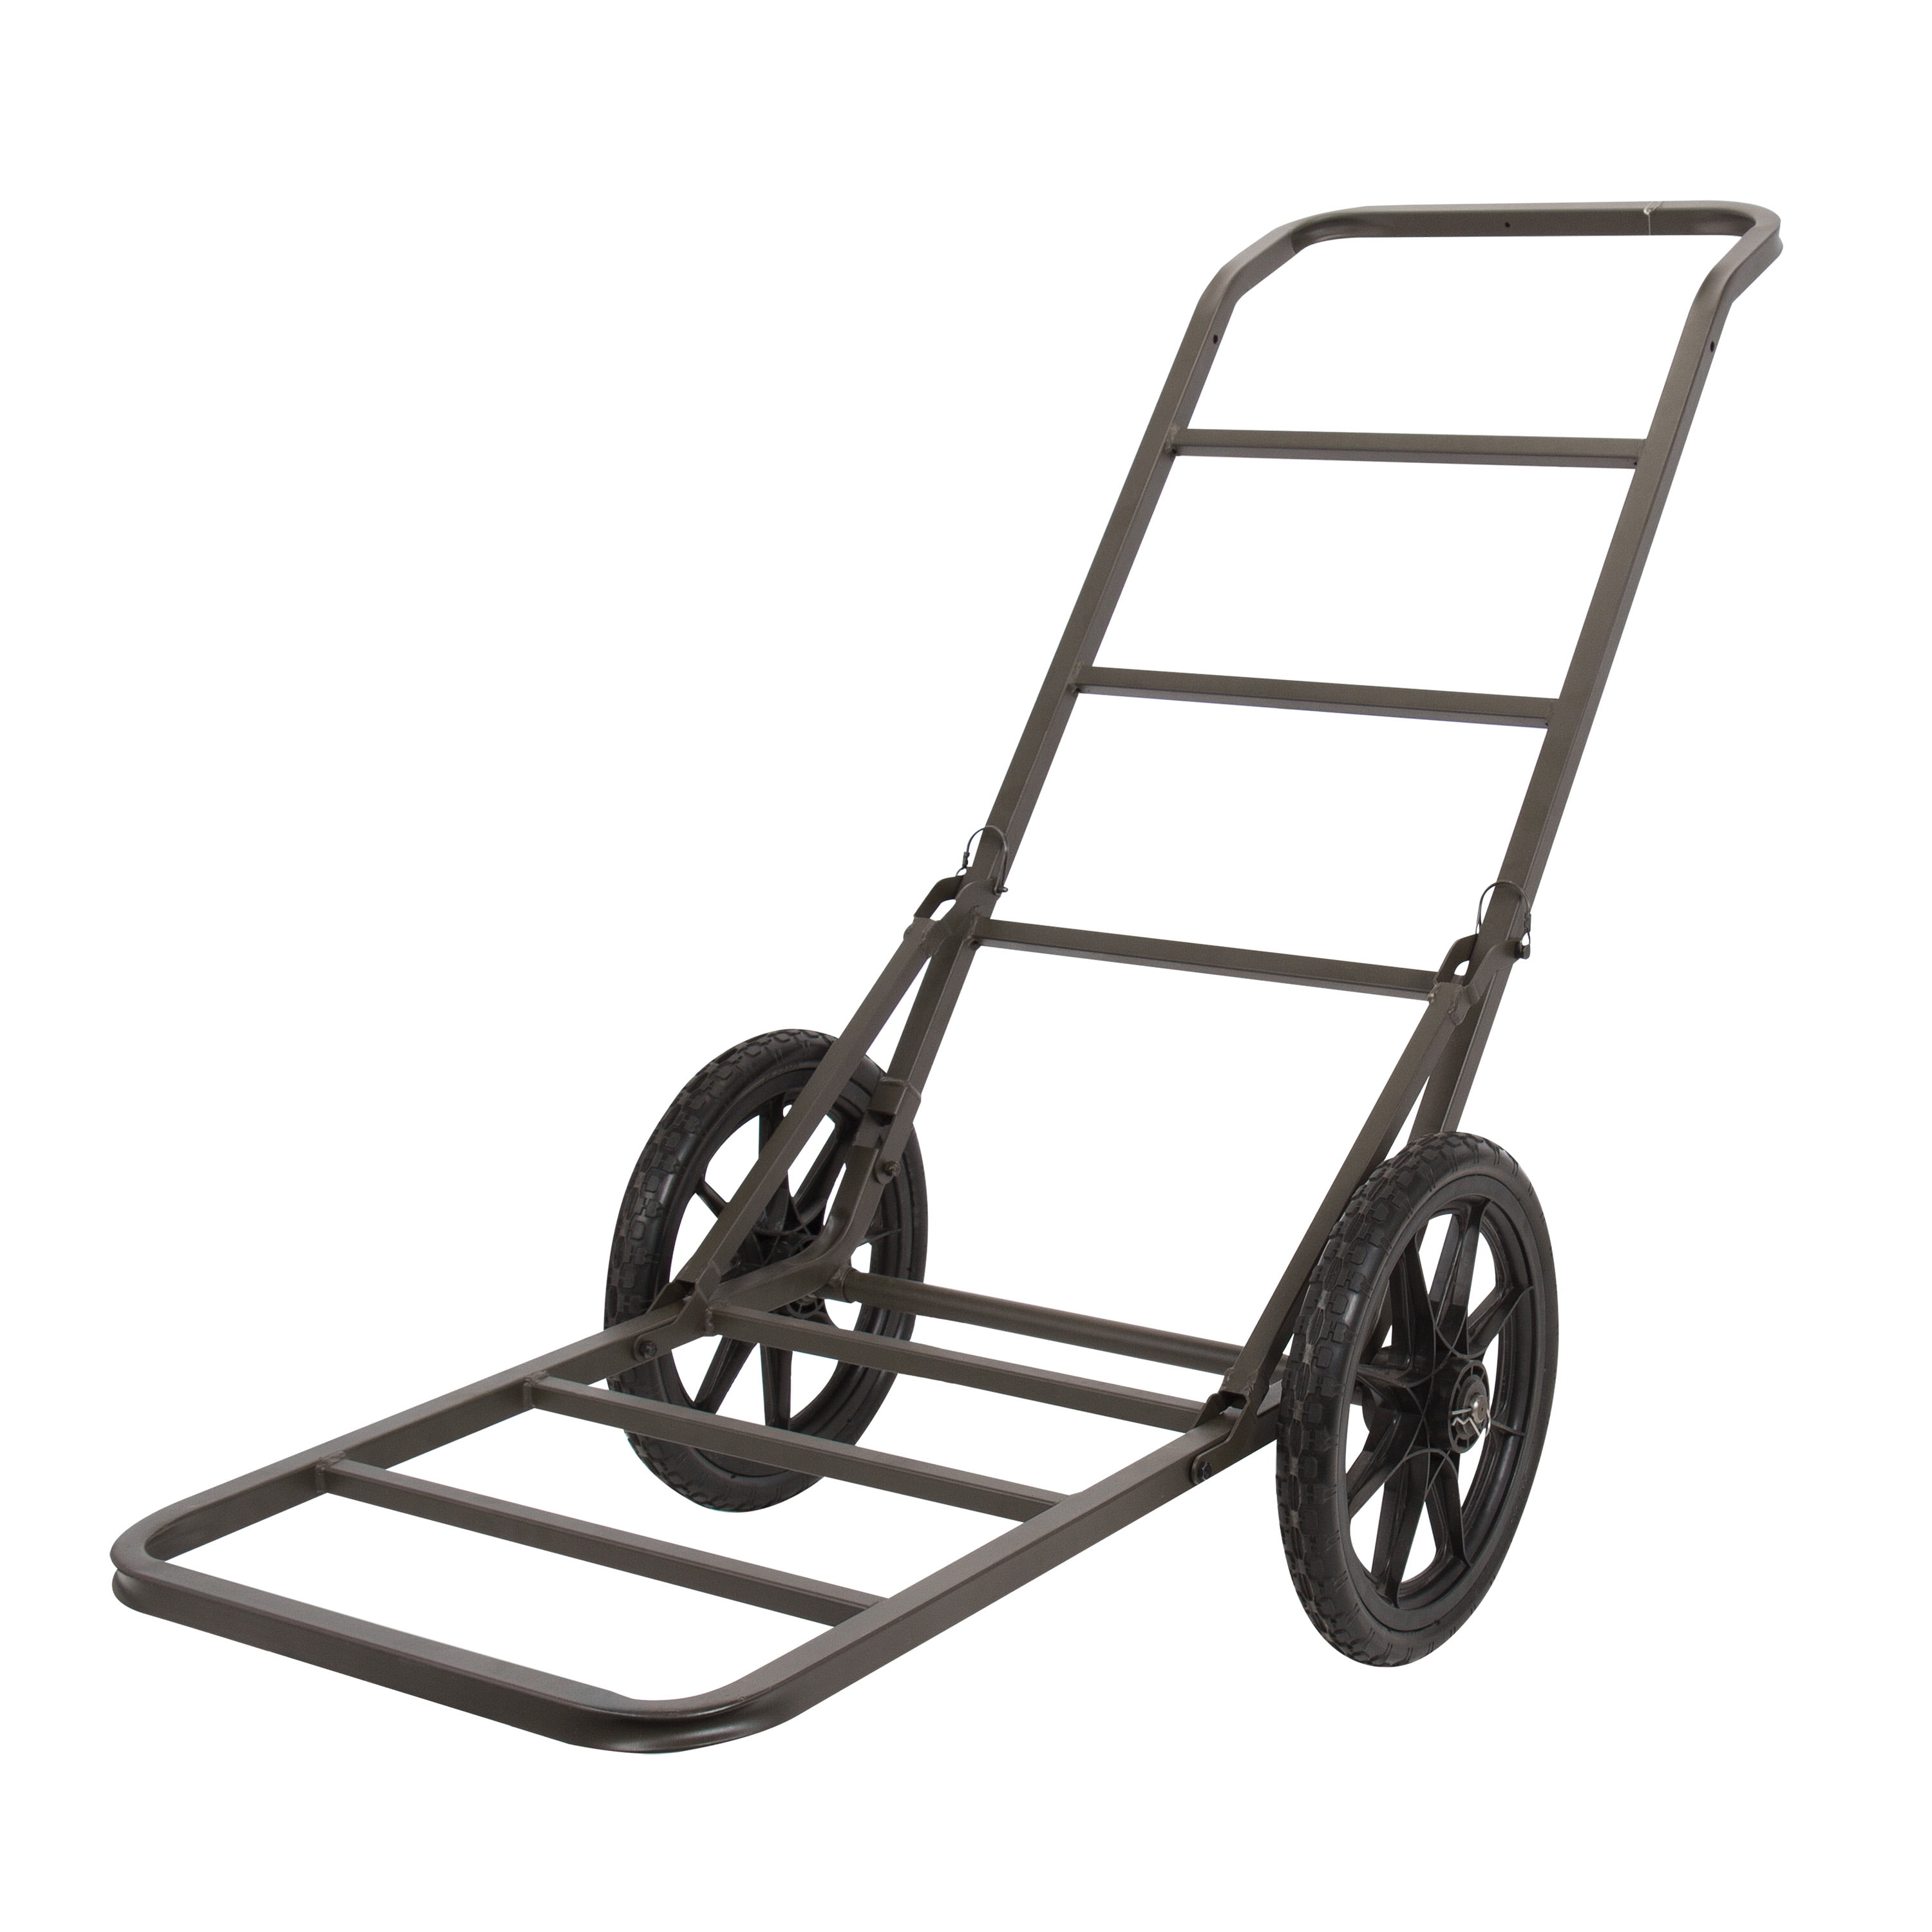 Details about   Hawk Crawler 500 Pound Capacity Foldable Multi Use Game Recovery Cart Black 